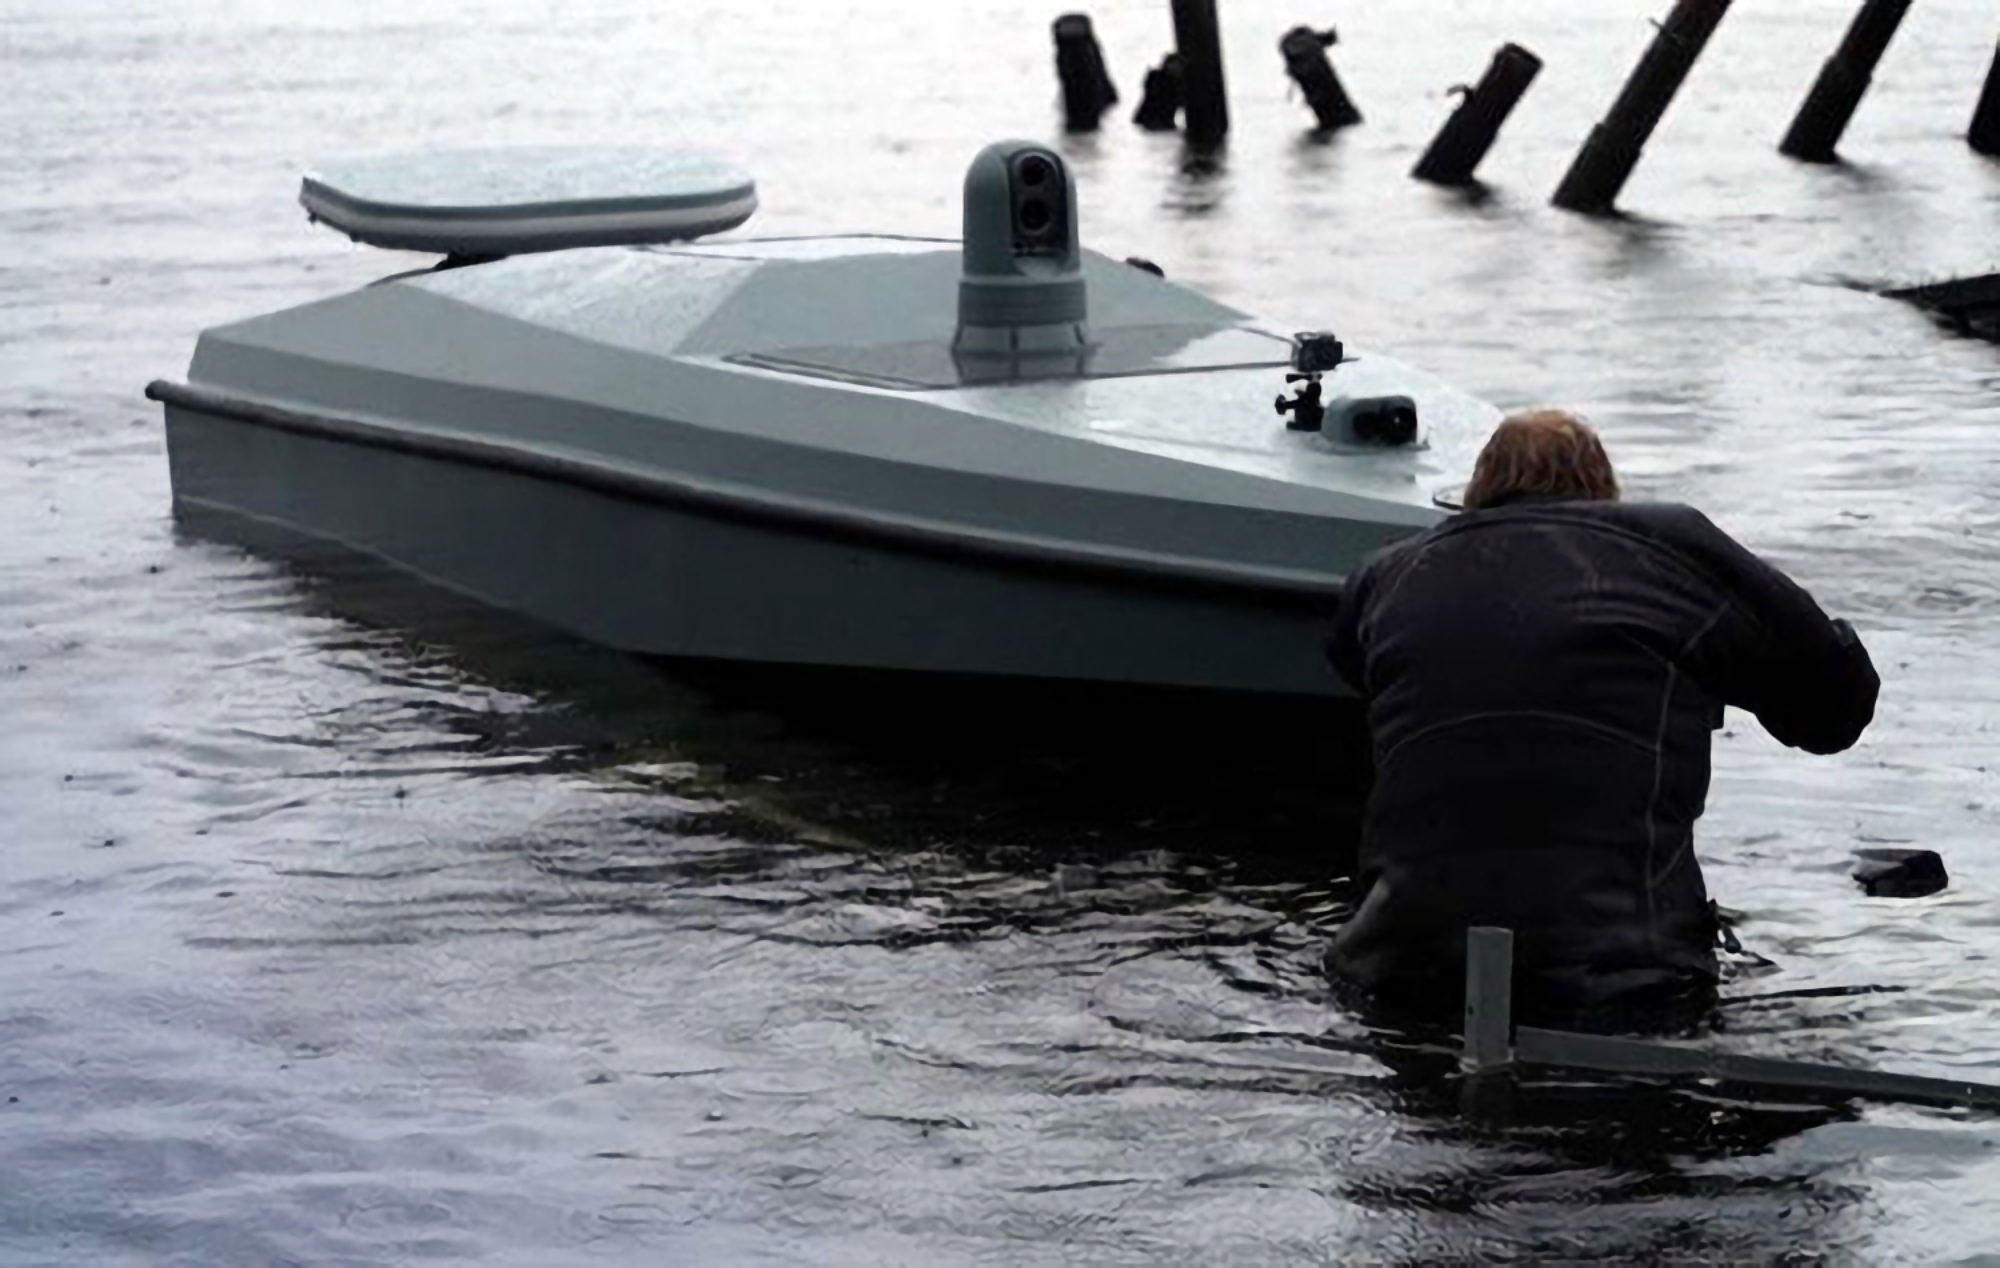 The AFU showed the Ukrainian marine drone MAGURA V5, which can hit targets at a distance of up to 800 kilometres (video)